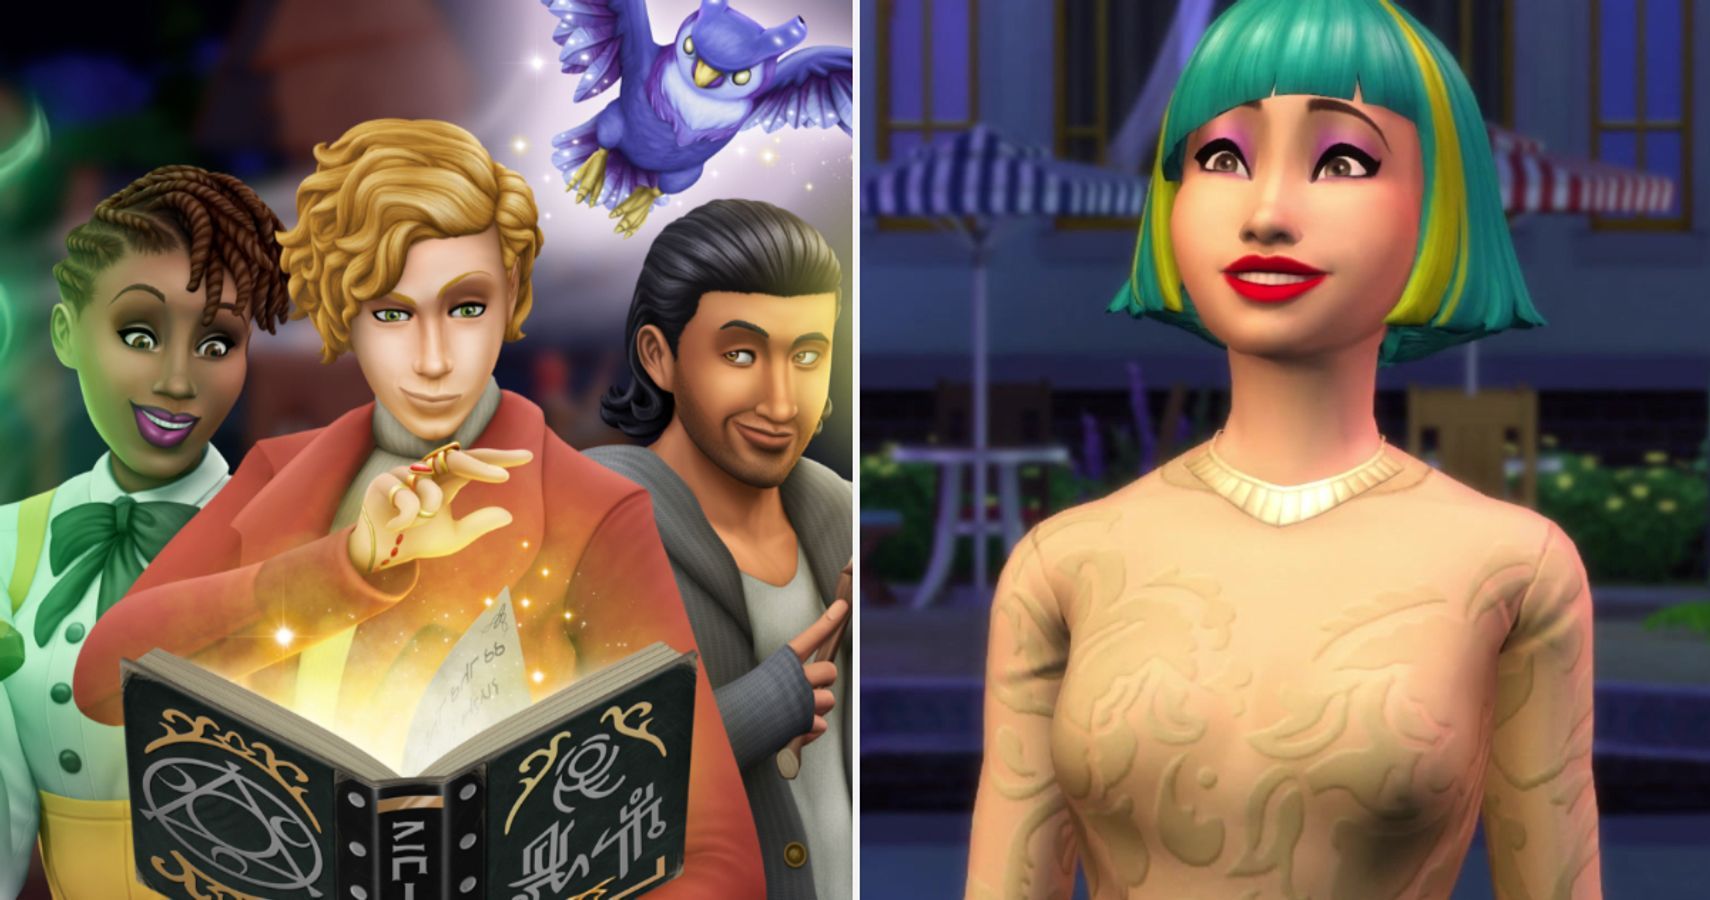 free direct download all sims 4 dlc